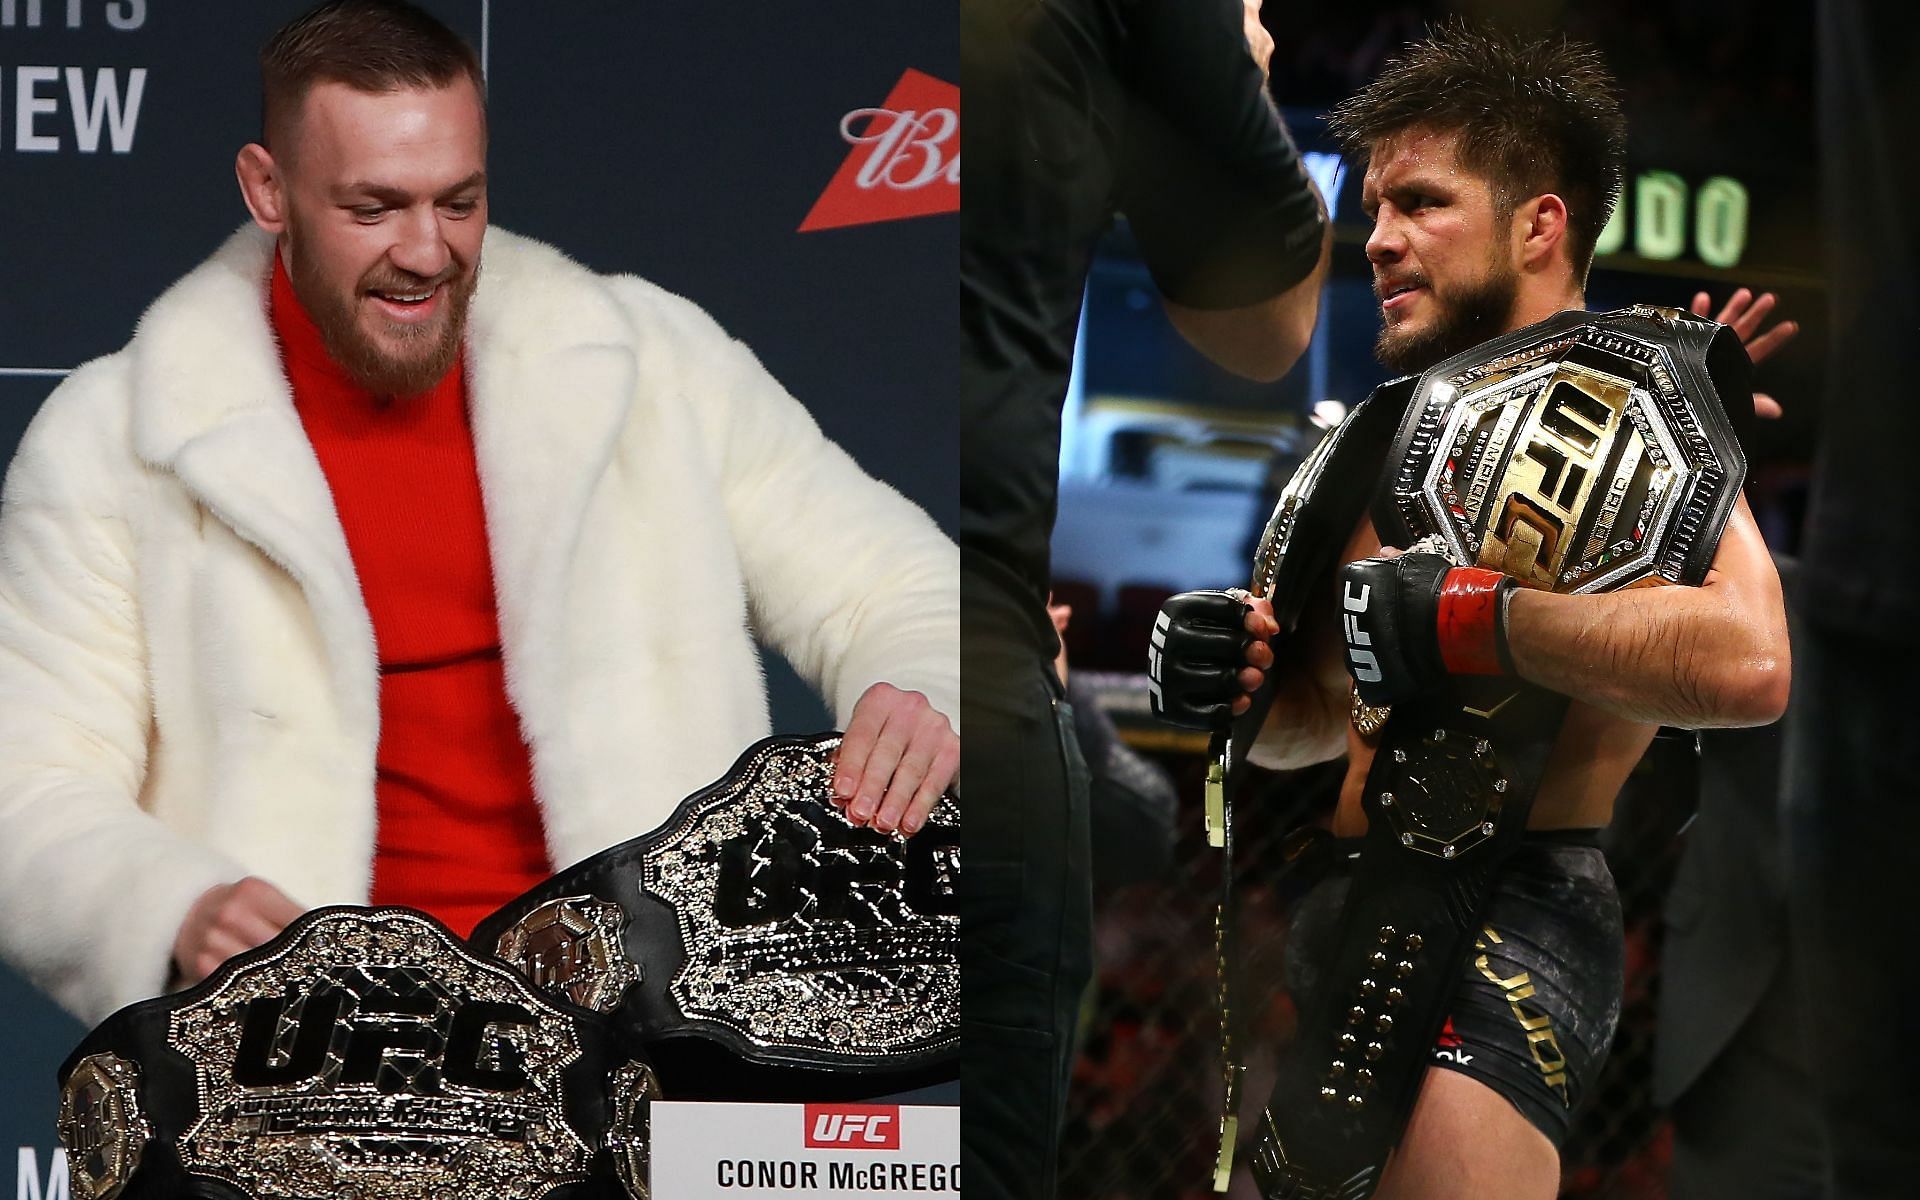 Conor McGregor (left) and Henry Cejudo (right) (Images via Getty)